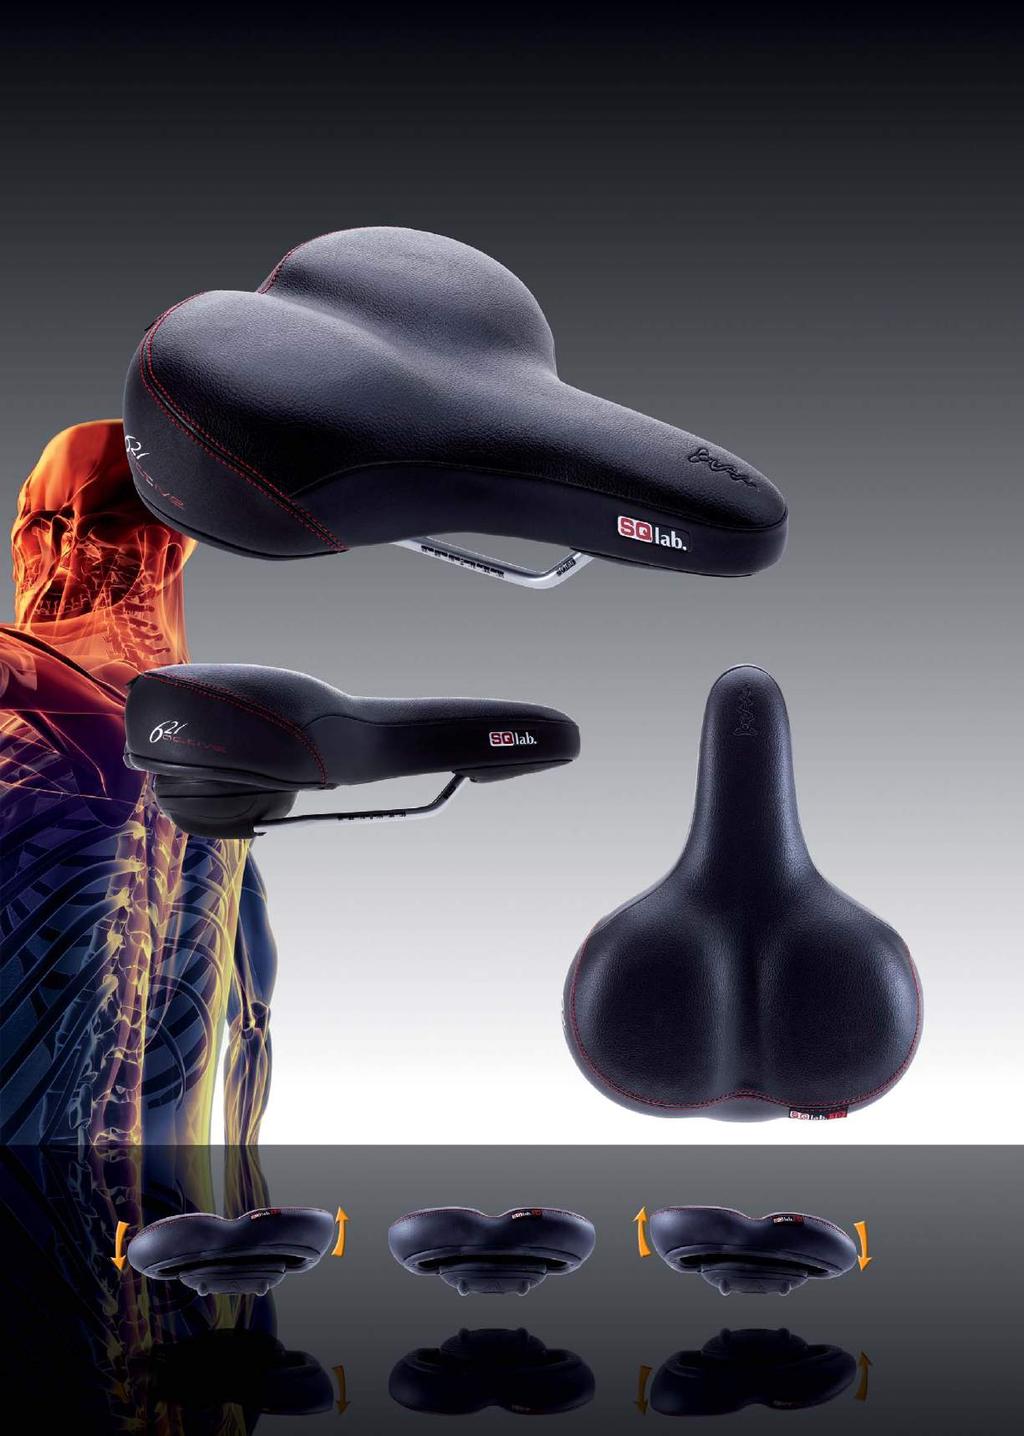 CITY/COMFORT A delight to the spine The saddle s dampened lateral tilt allows it to follow the biomechanical movement